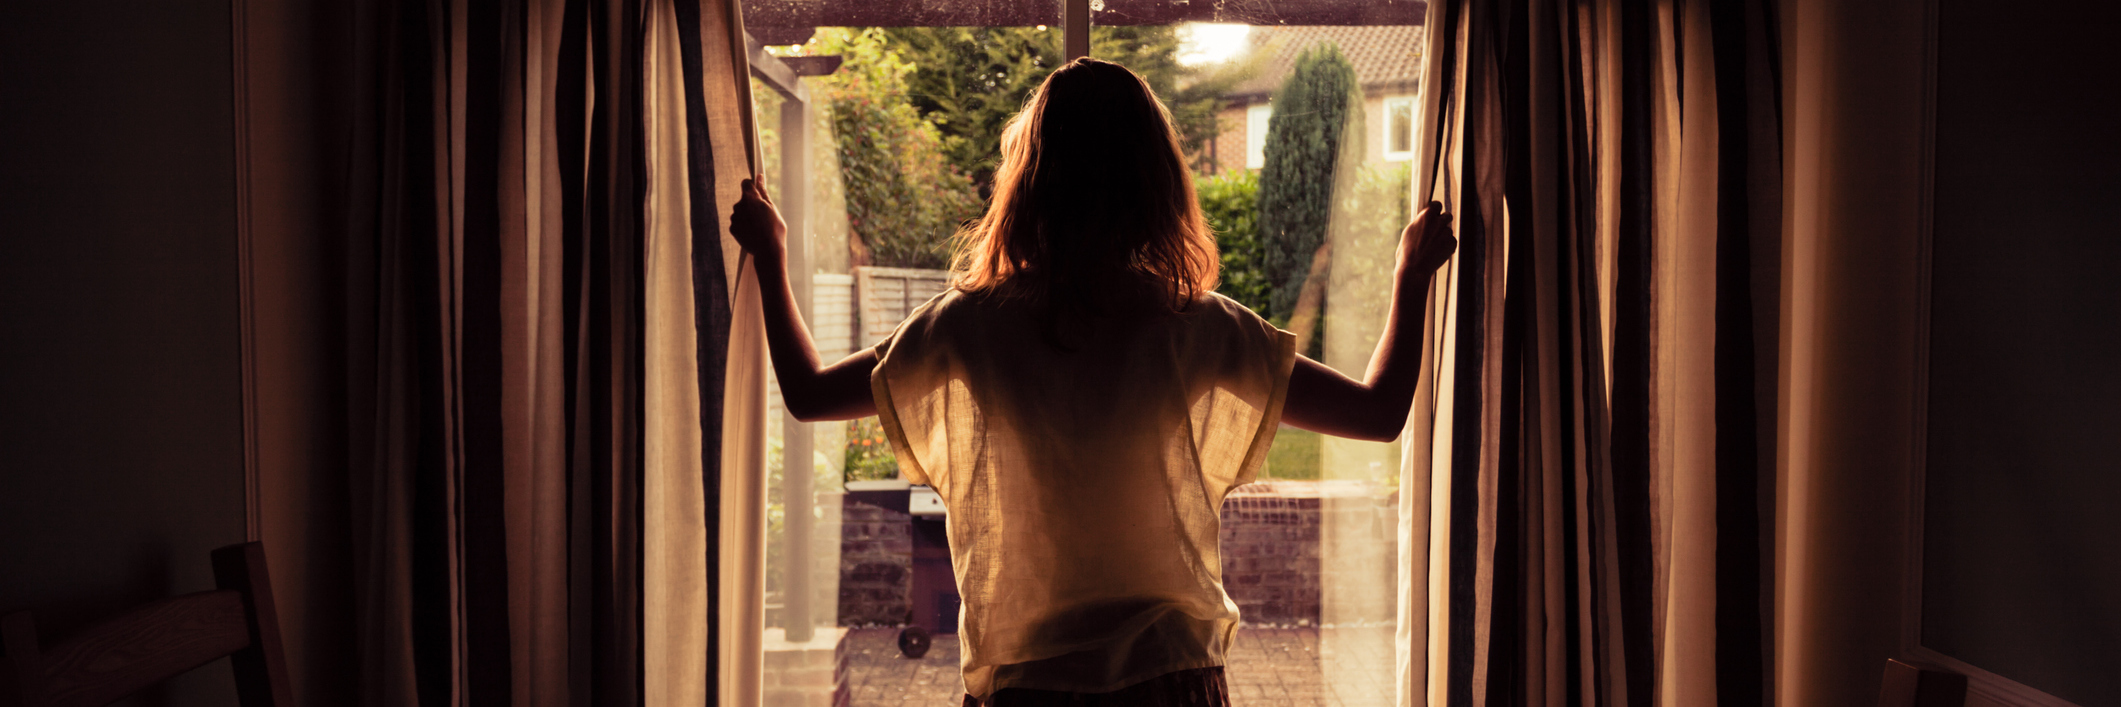 woman opening curtains at sunrise